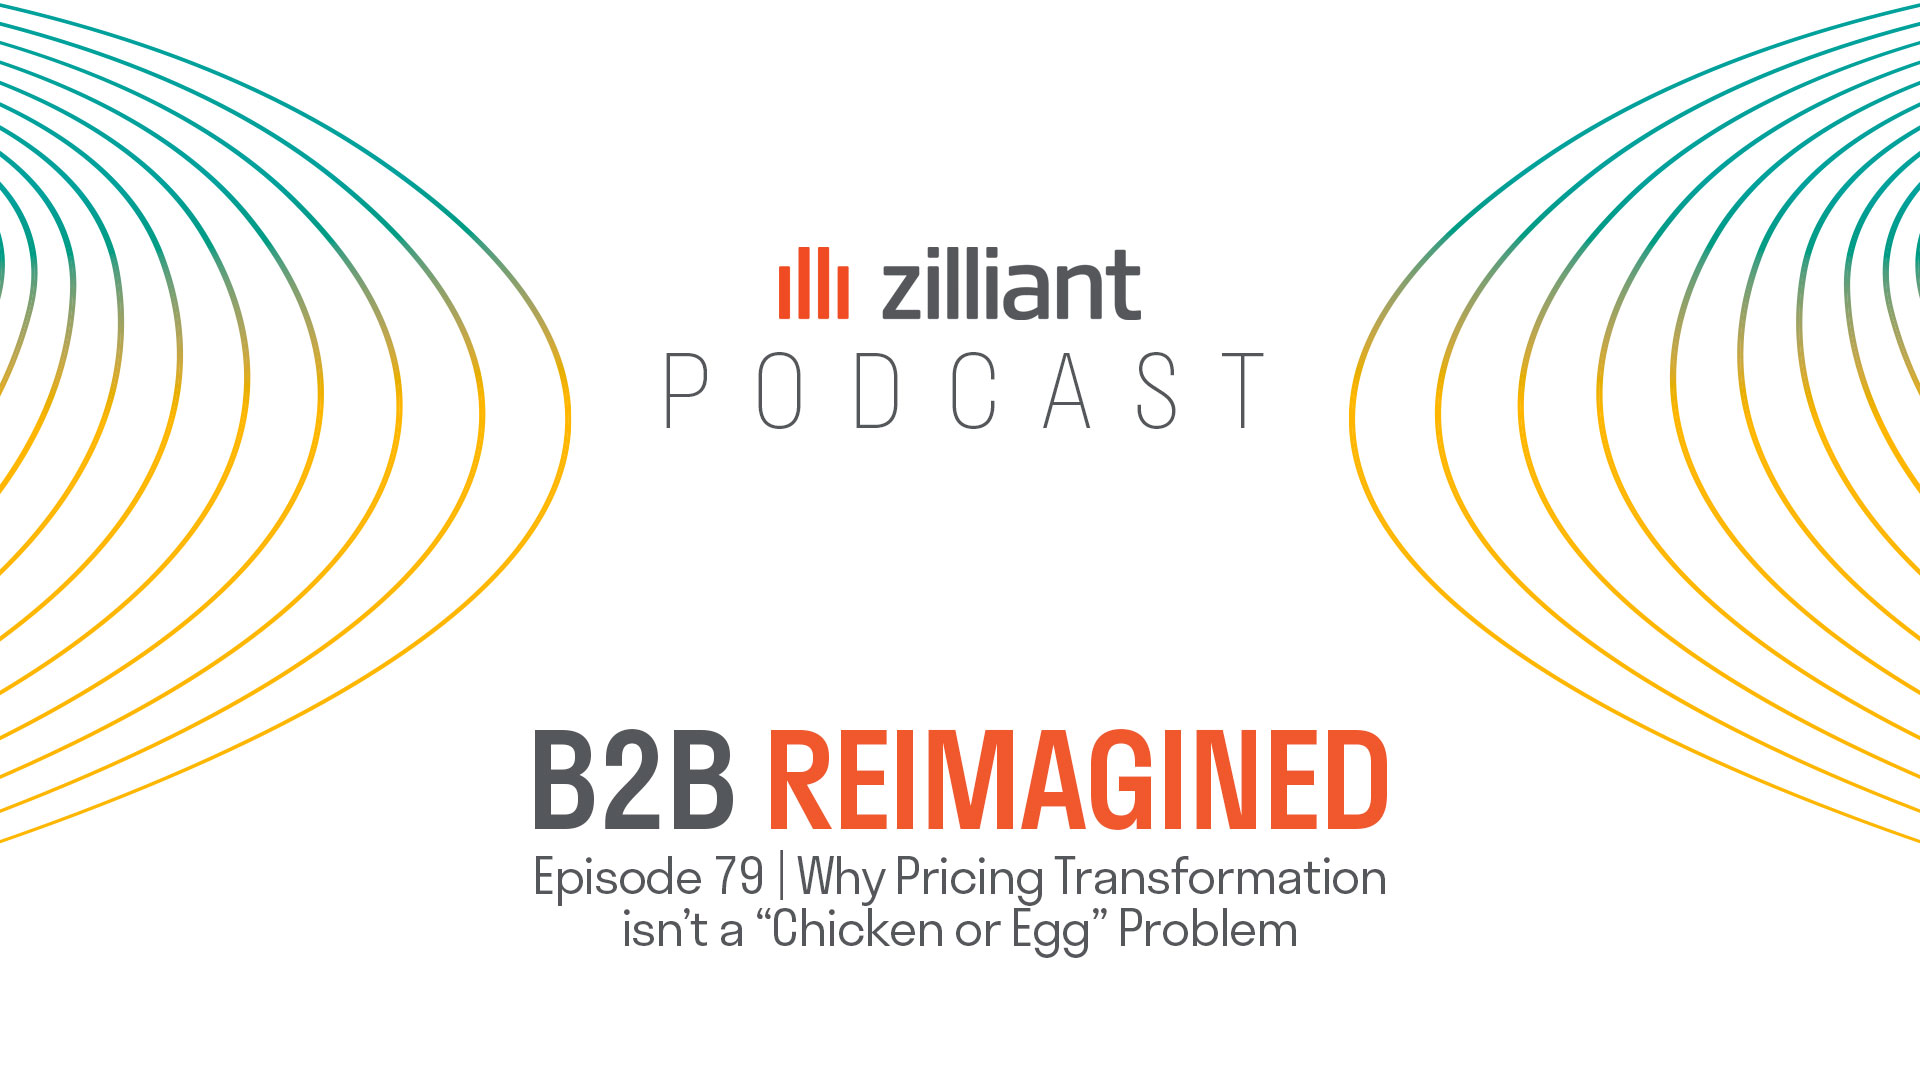 Why Pricing Transformation isn’t a “Chicken or Egg” Problem